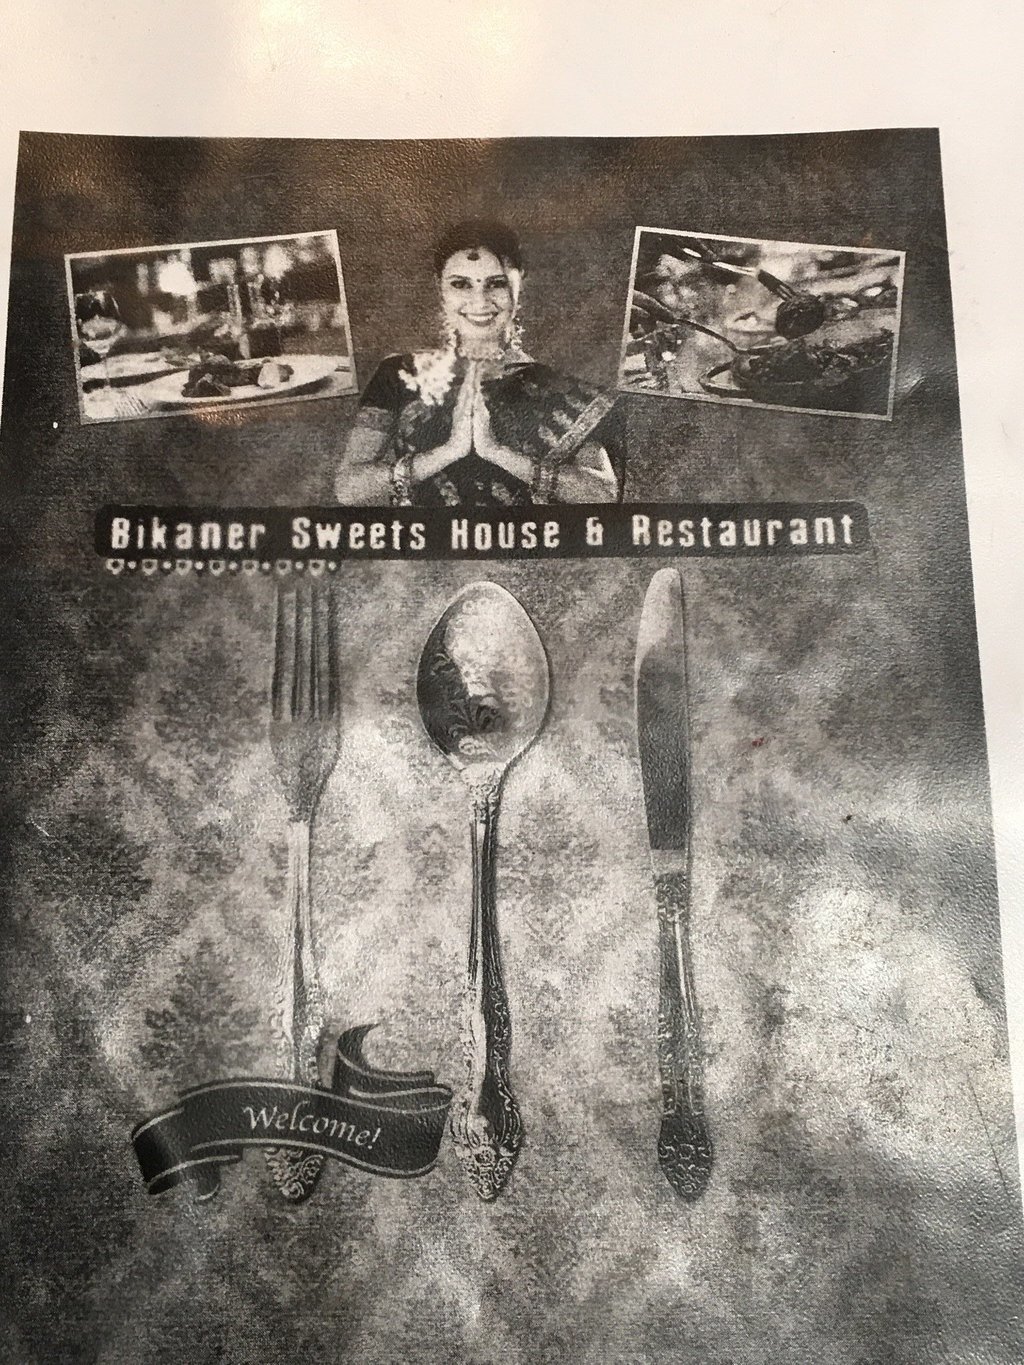 Bikaner sweets house and restaurant